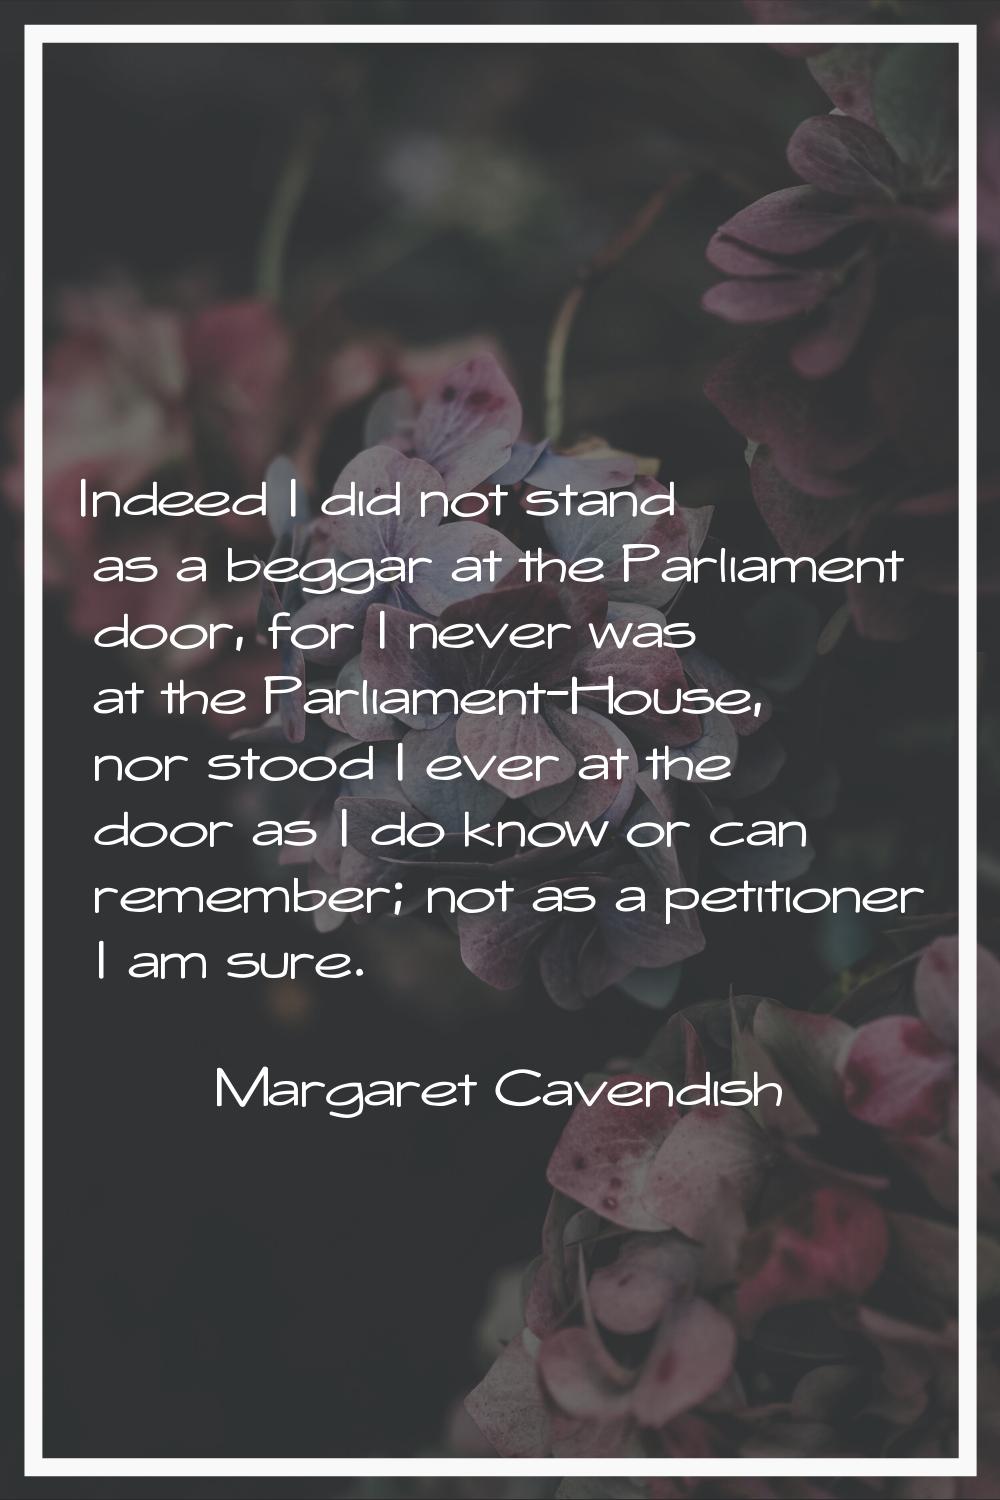 Indeed I did not stand as a beggar at the Parliament door, for I never was at the Parliament-House,